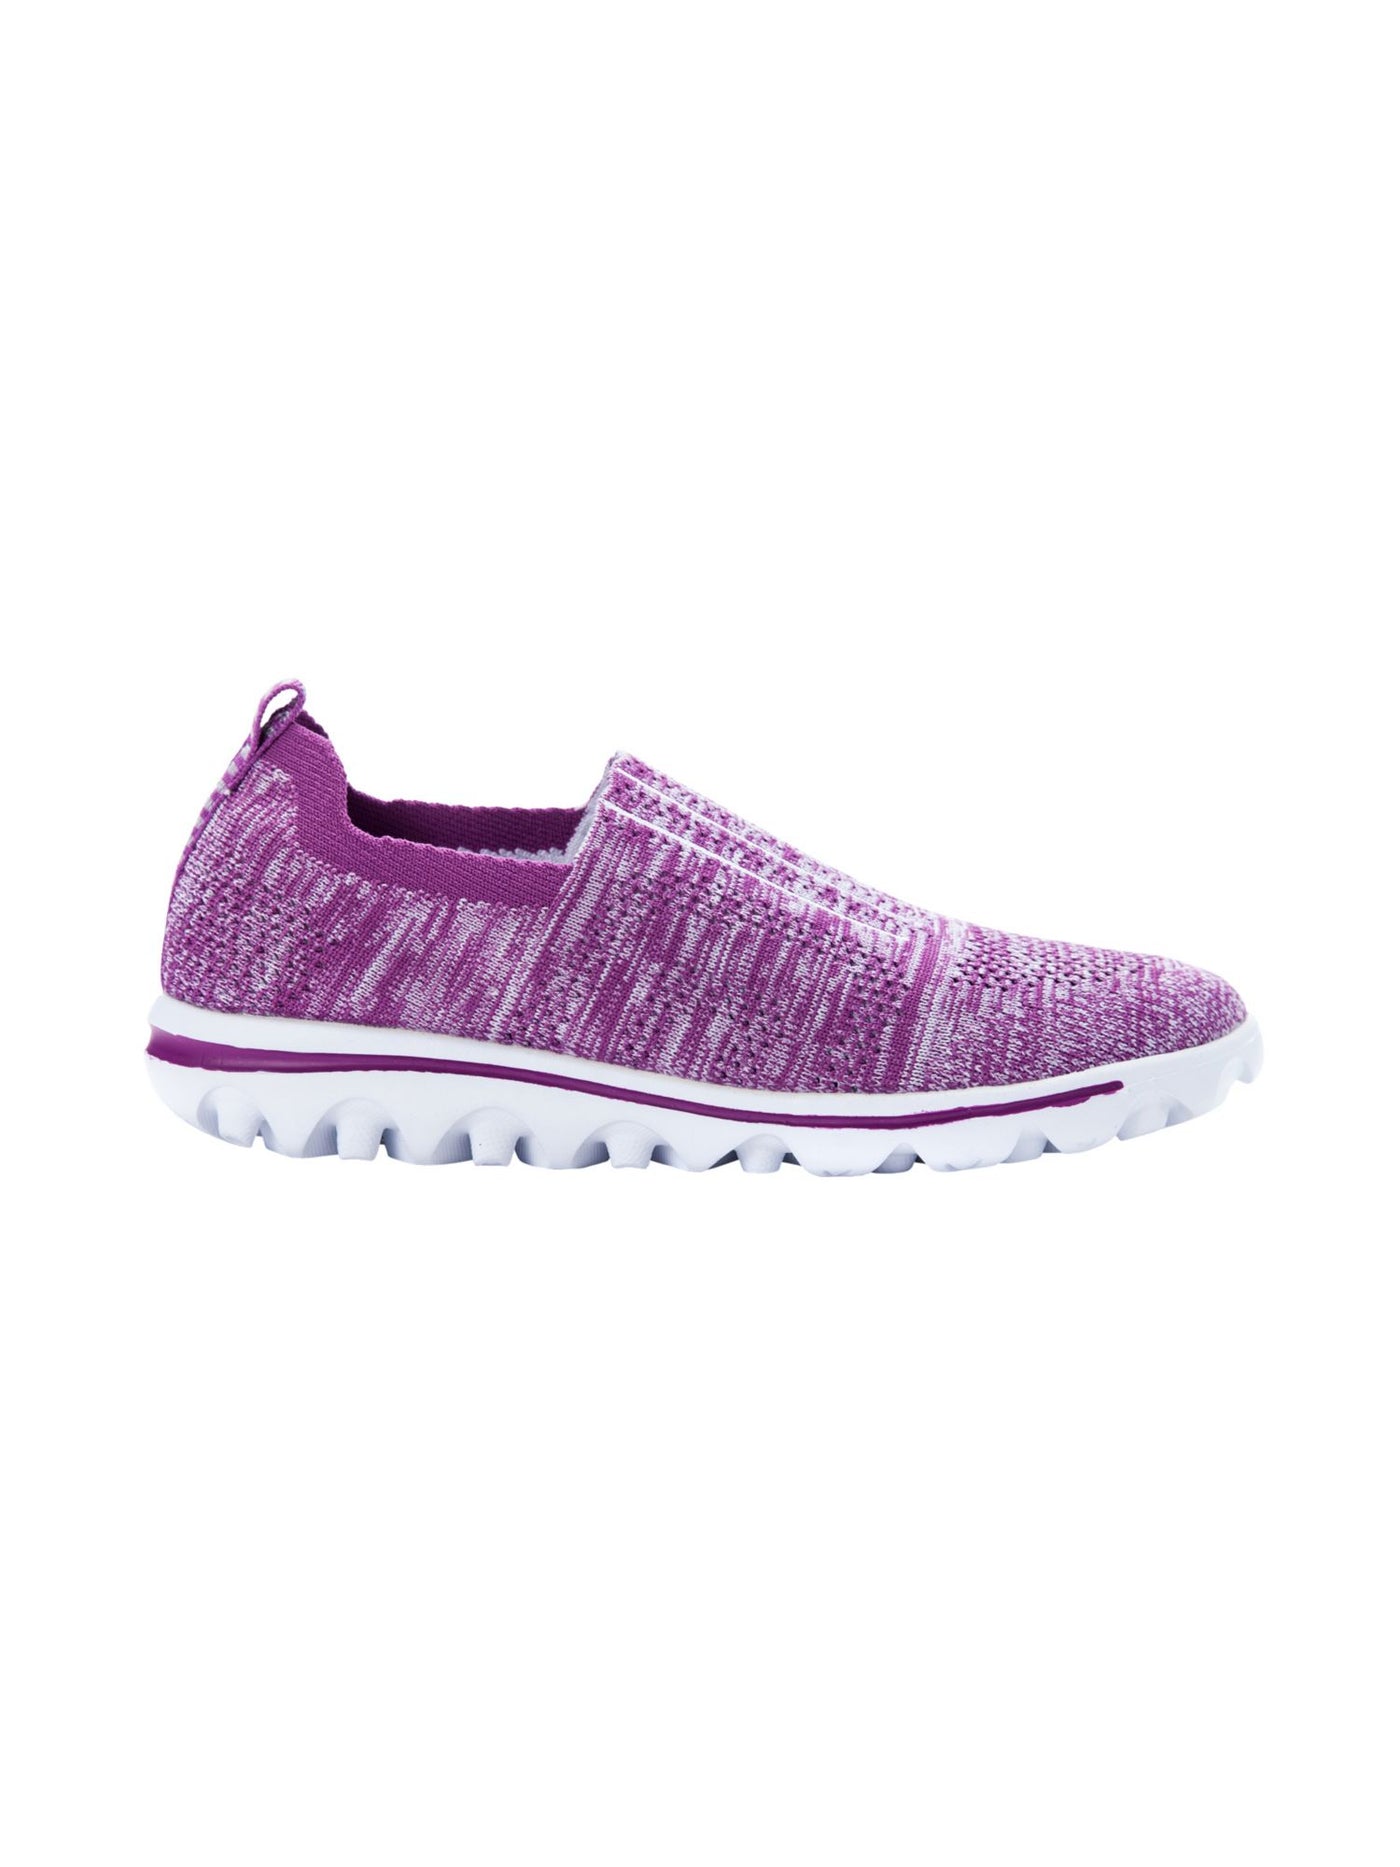 PROPET Womens Purple Mixed Knit Stretch Flex Heel Pull-Tab Cushioned Breathable Travelactiv Round Toe Wedge Slip On Sneakers Shoes 9.5N AA